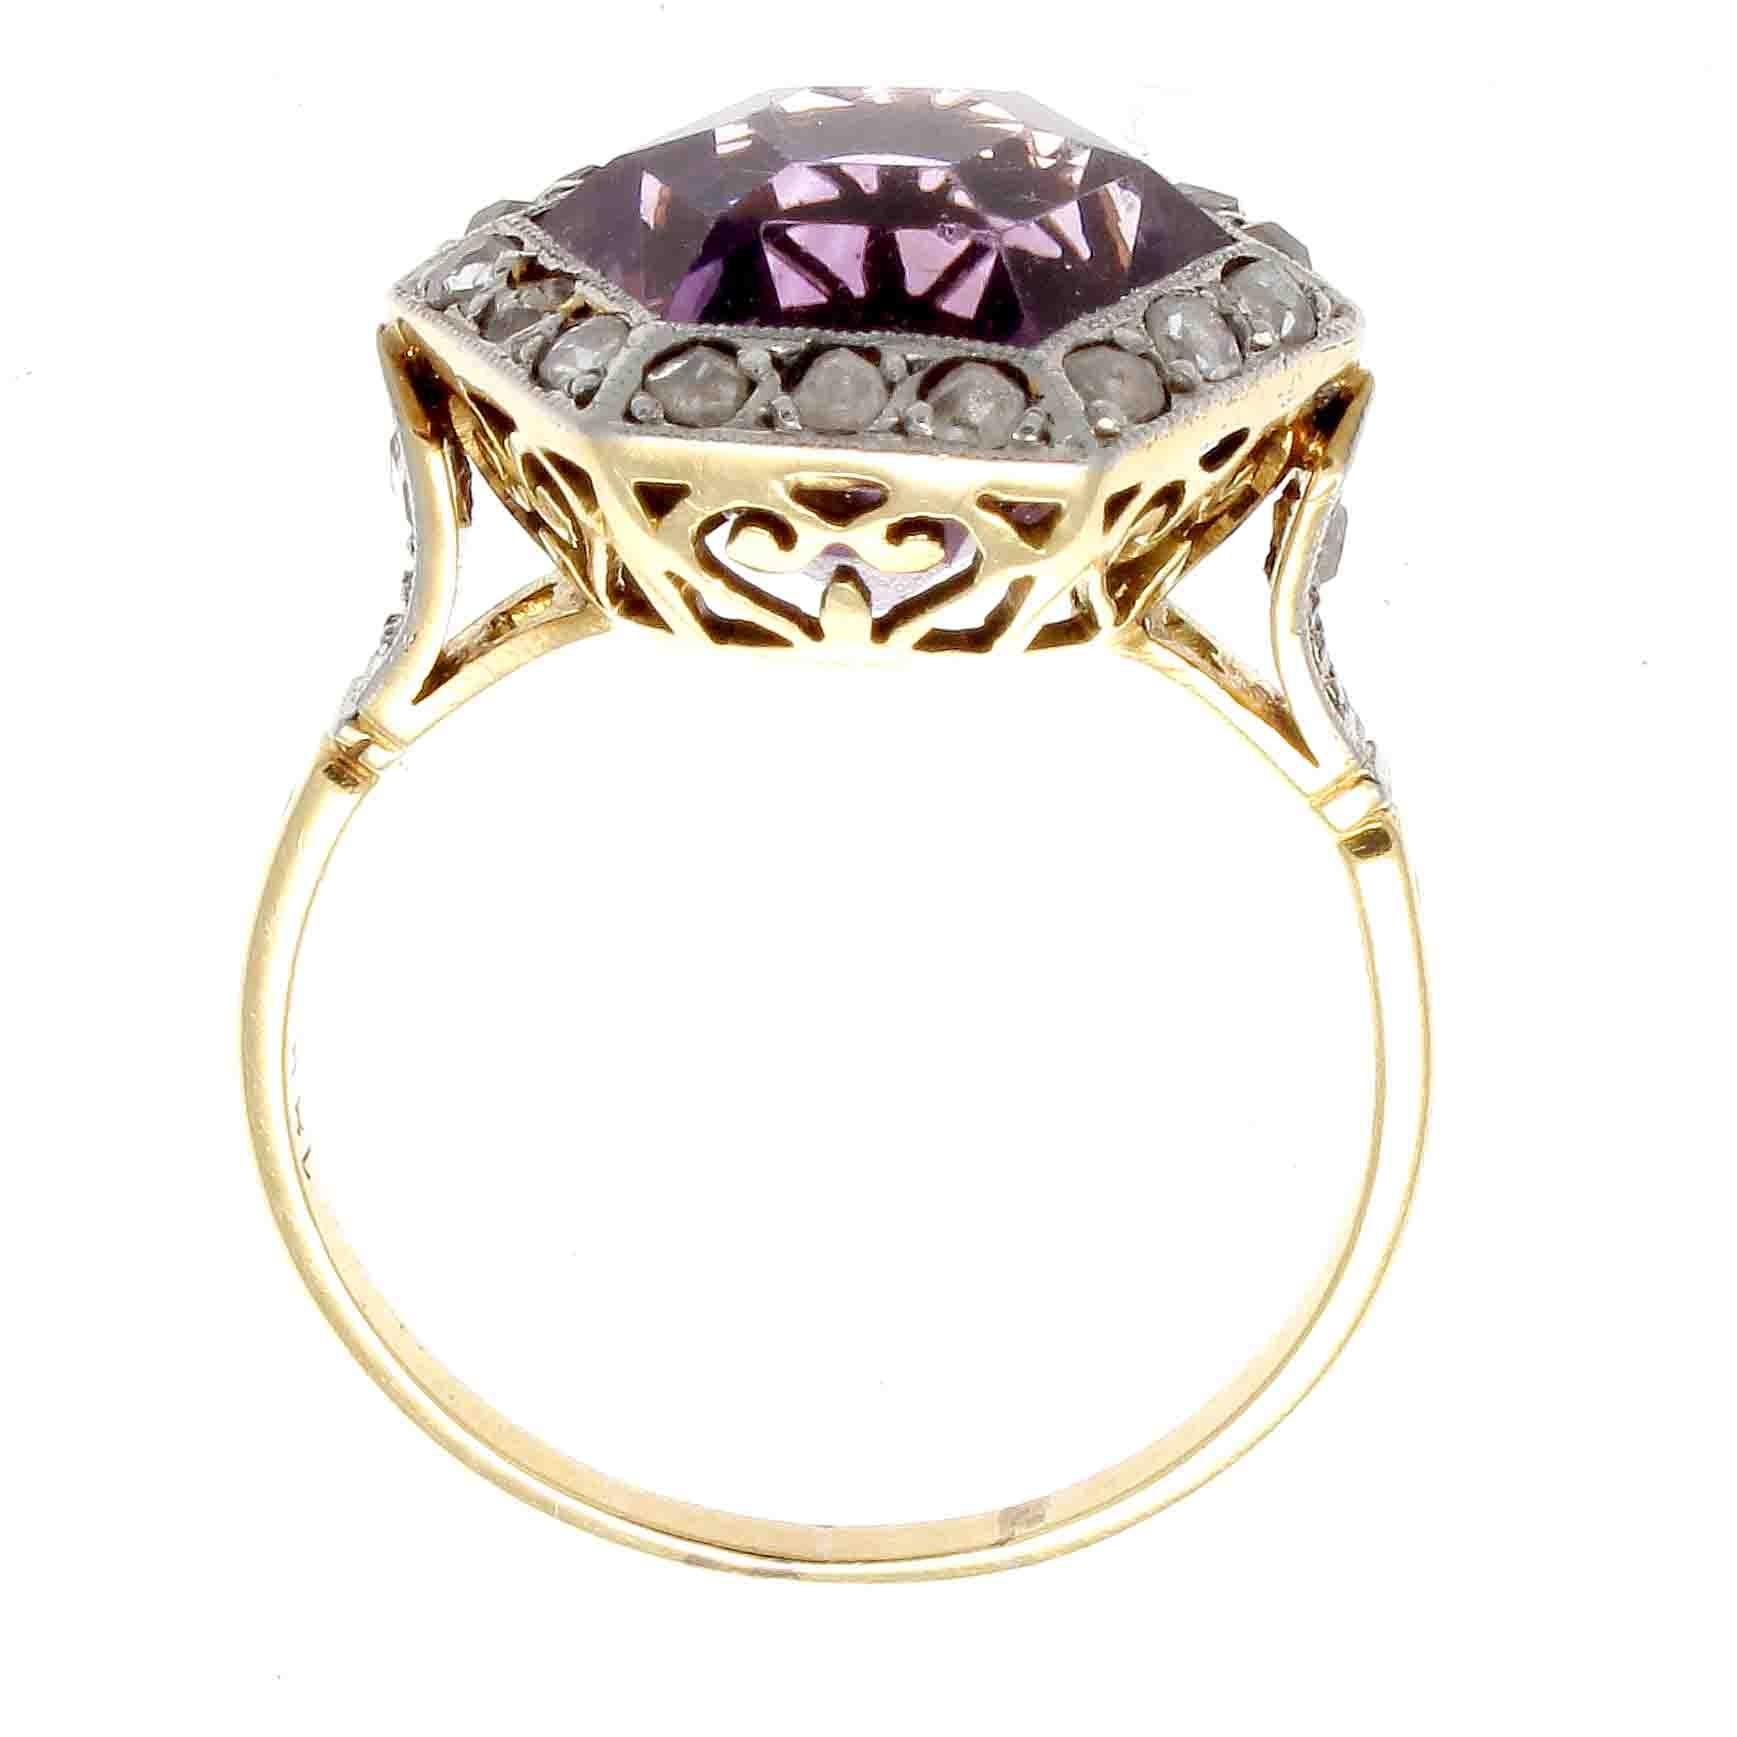 The Victorian era is a time of change, experiments and revolutionary style changes. This 19th century creation features a vibrant purple hexagonal amethyst outlined by rows by rose cut diamonds. Hand crafted in 18k yellow gold and platinum.   

Ring